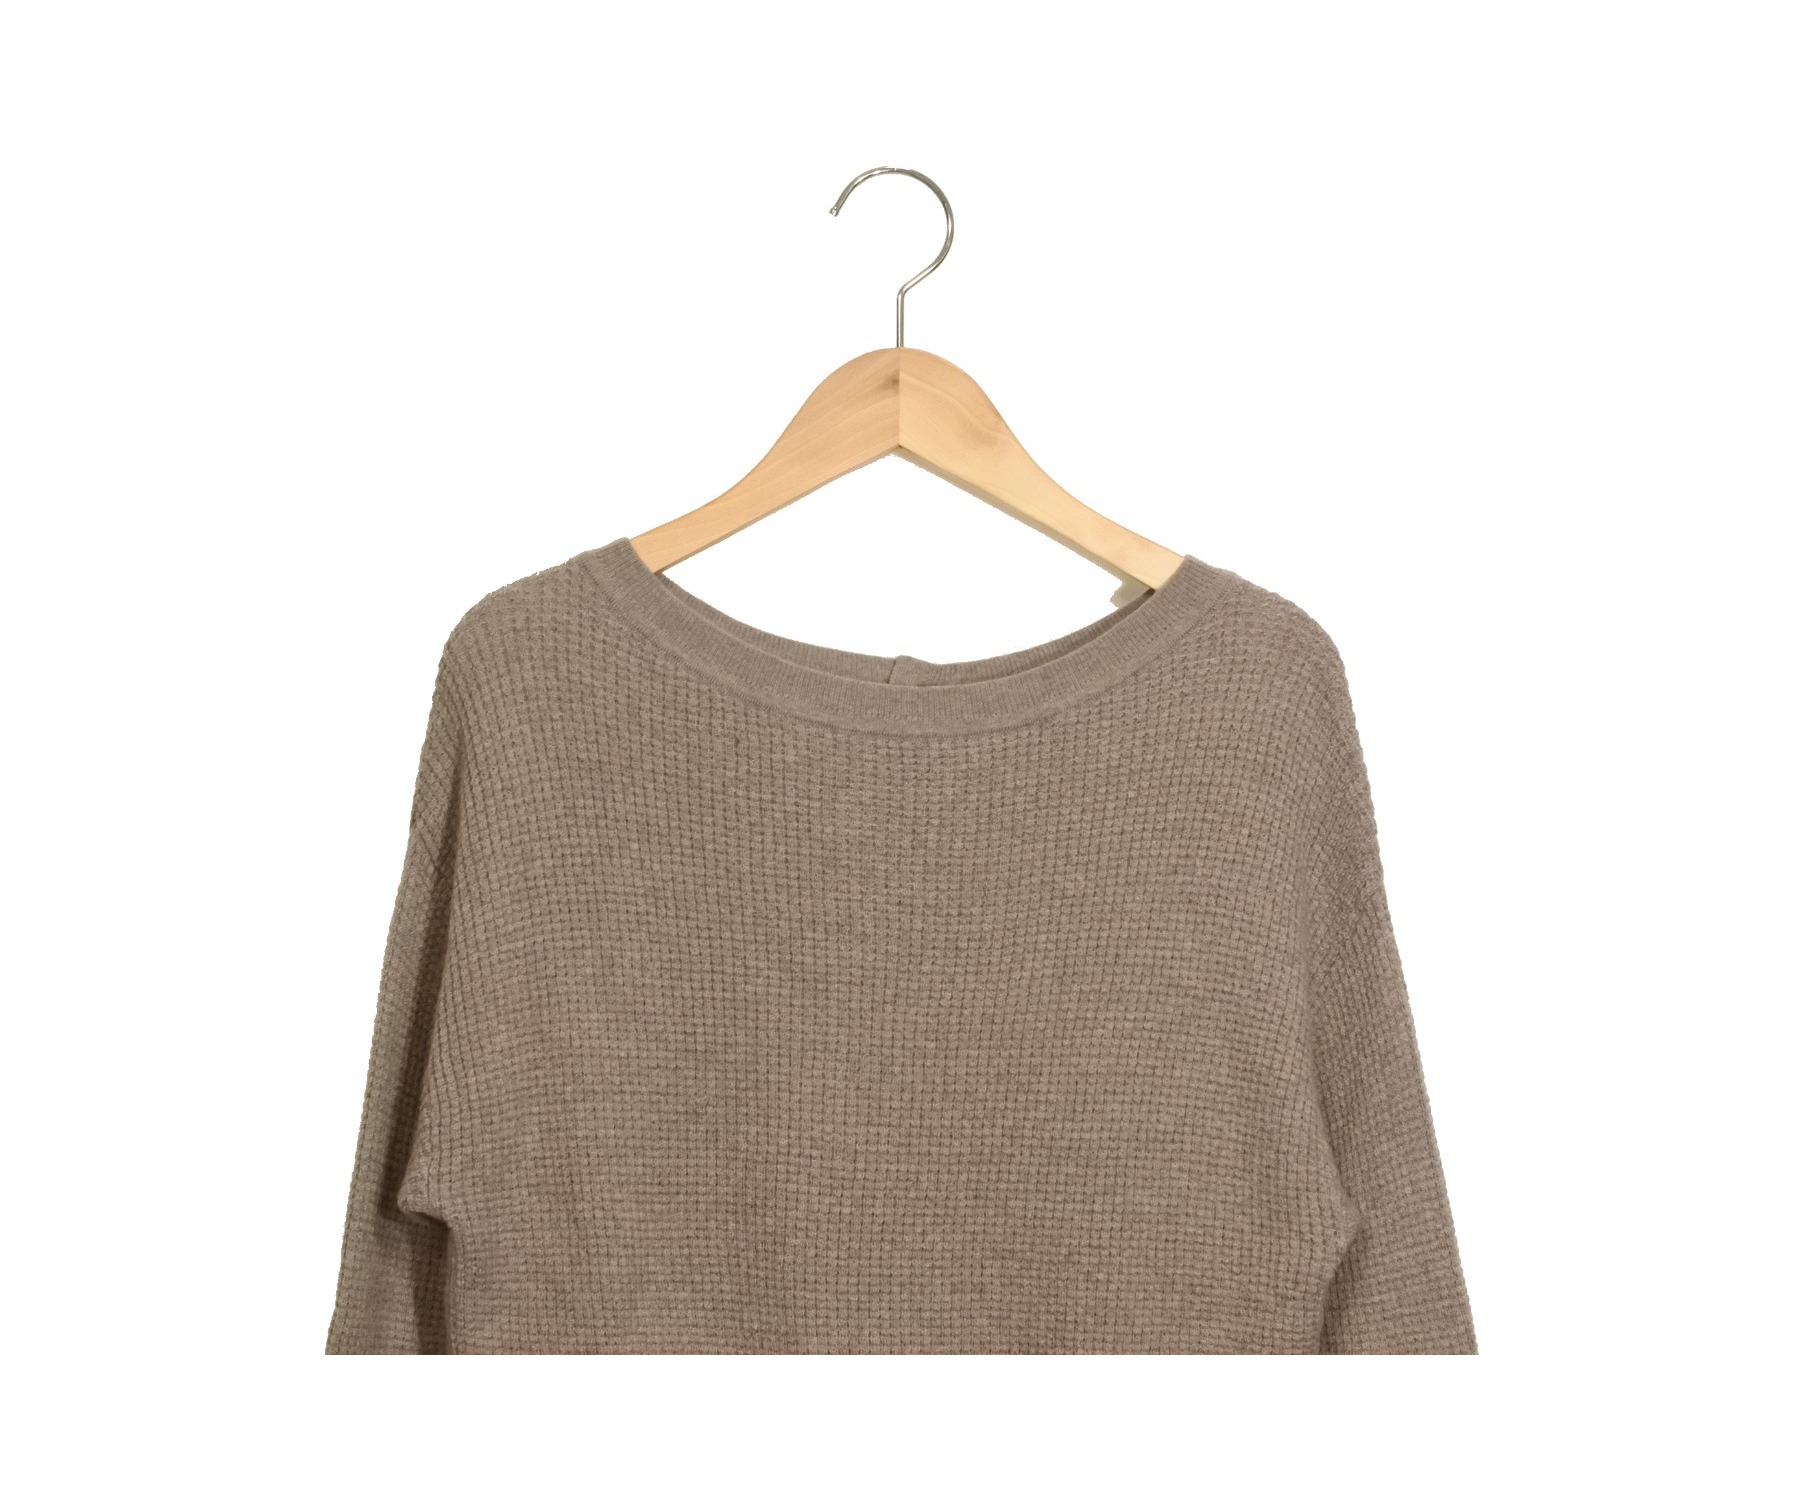 L'Appartment 19SS  Thermal Inner Knit 美品